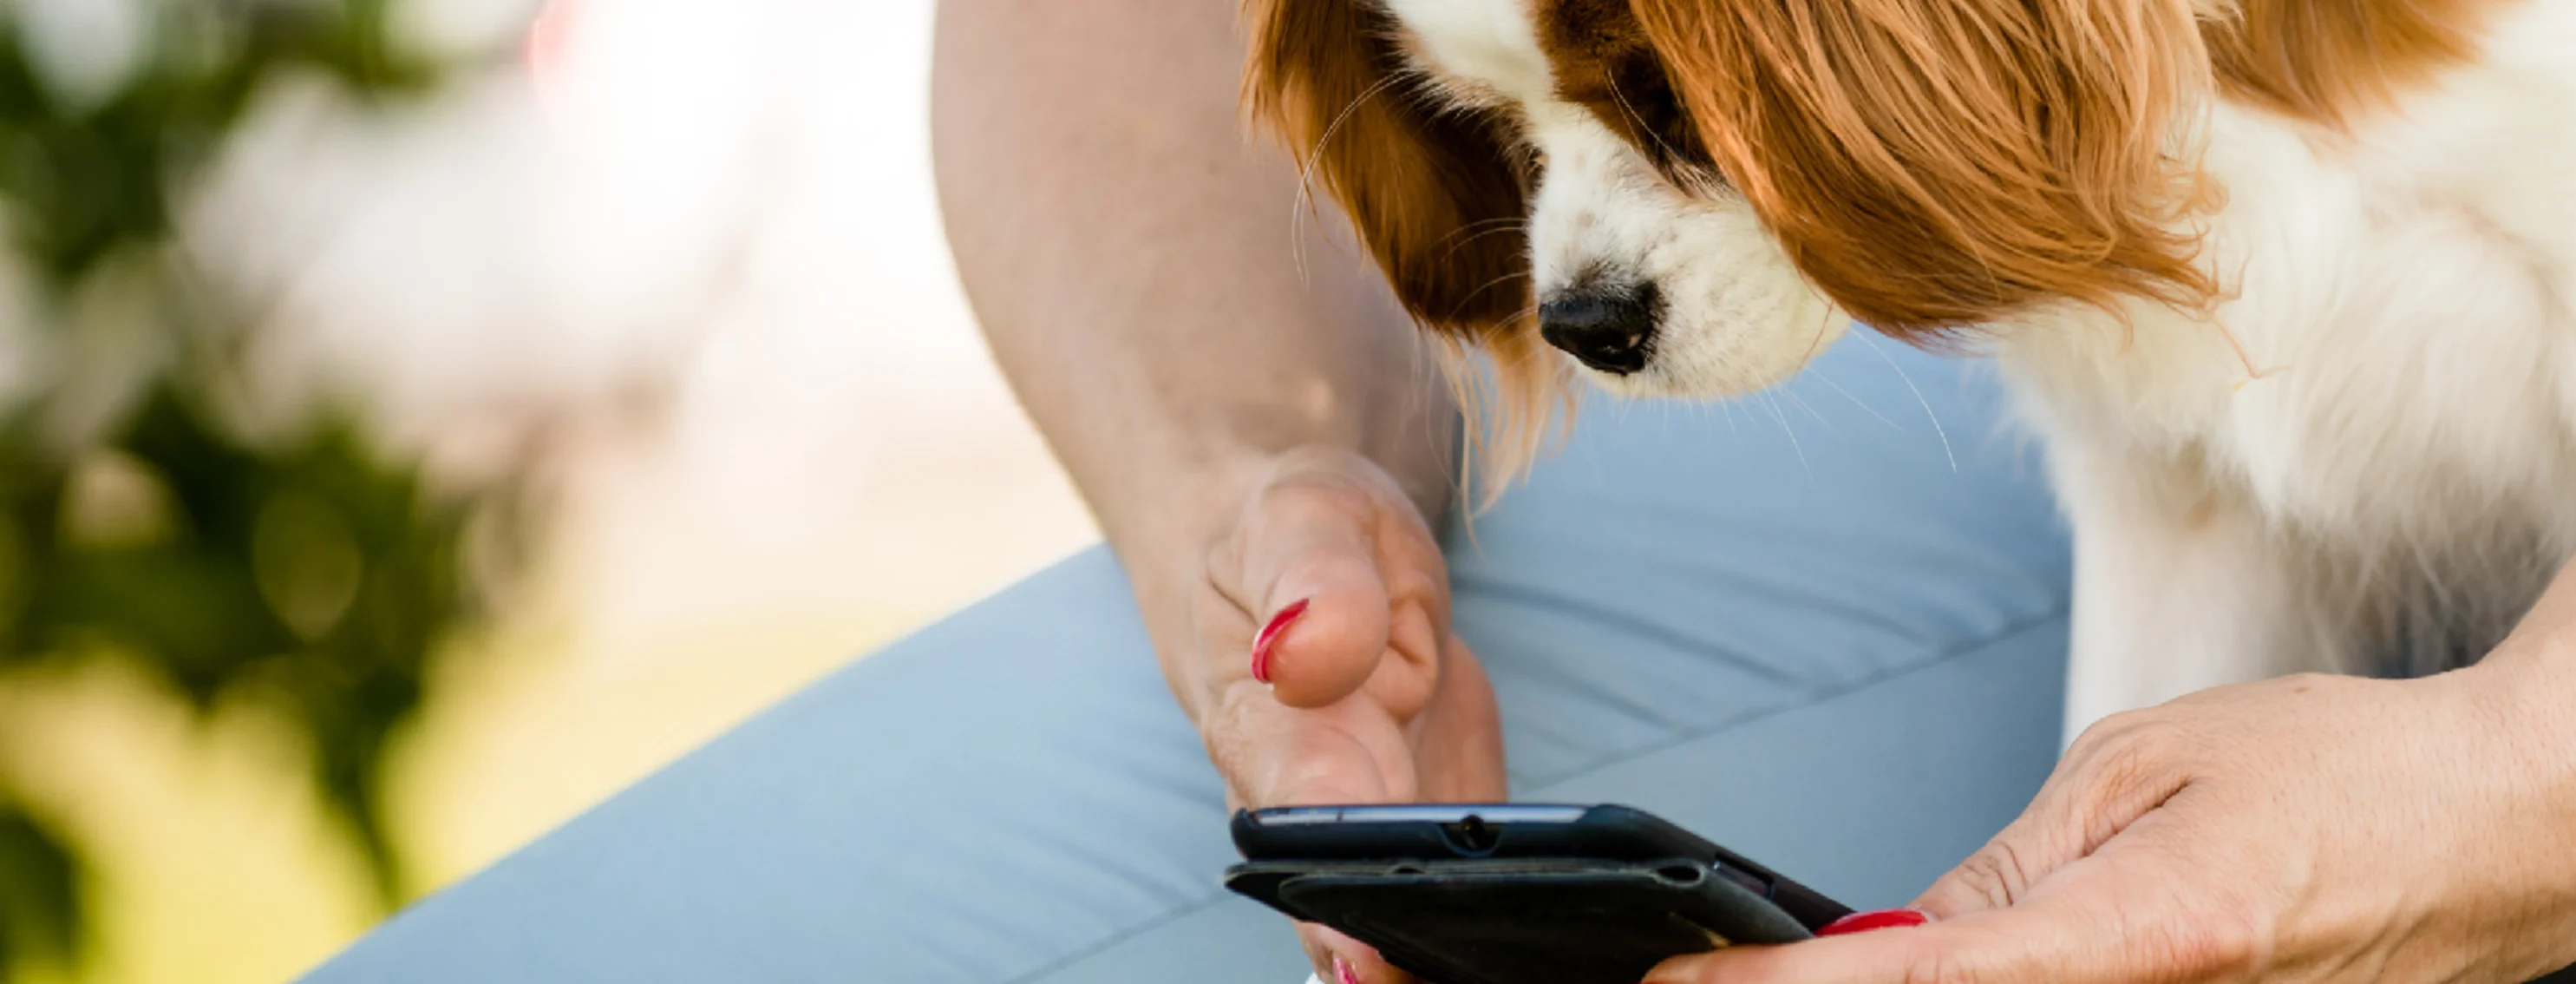 A person browsing their phone with a dog